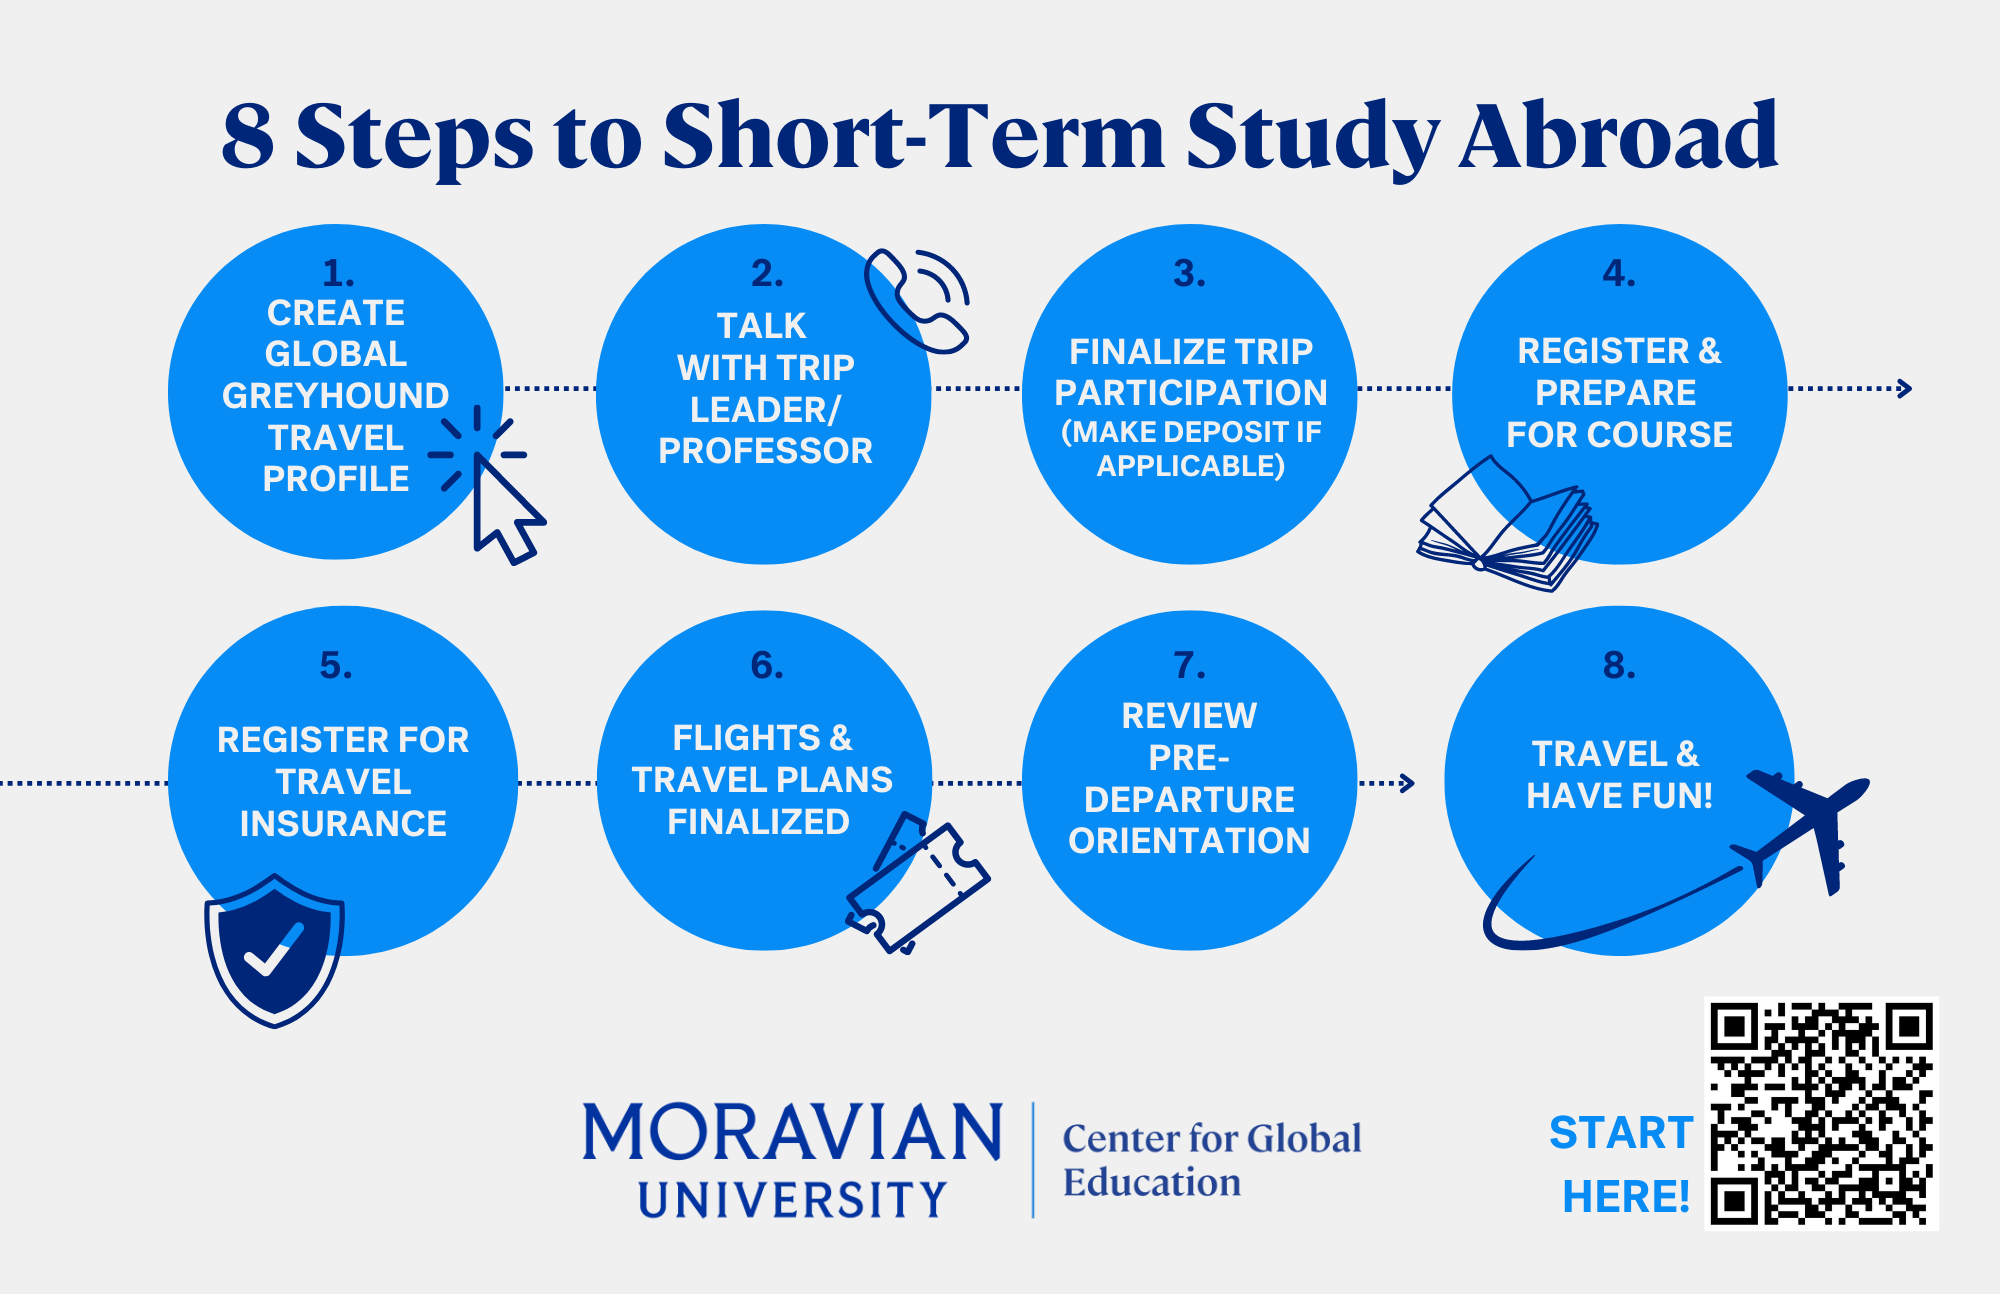 Six steps to study abroad for short-term travel